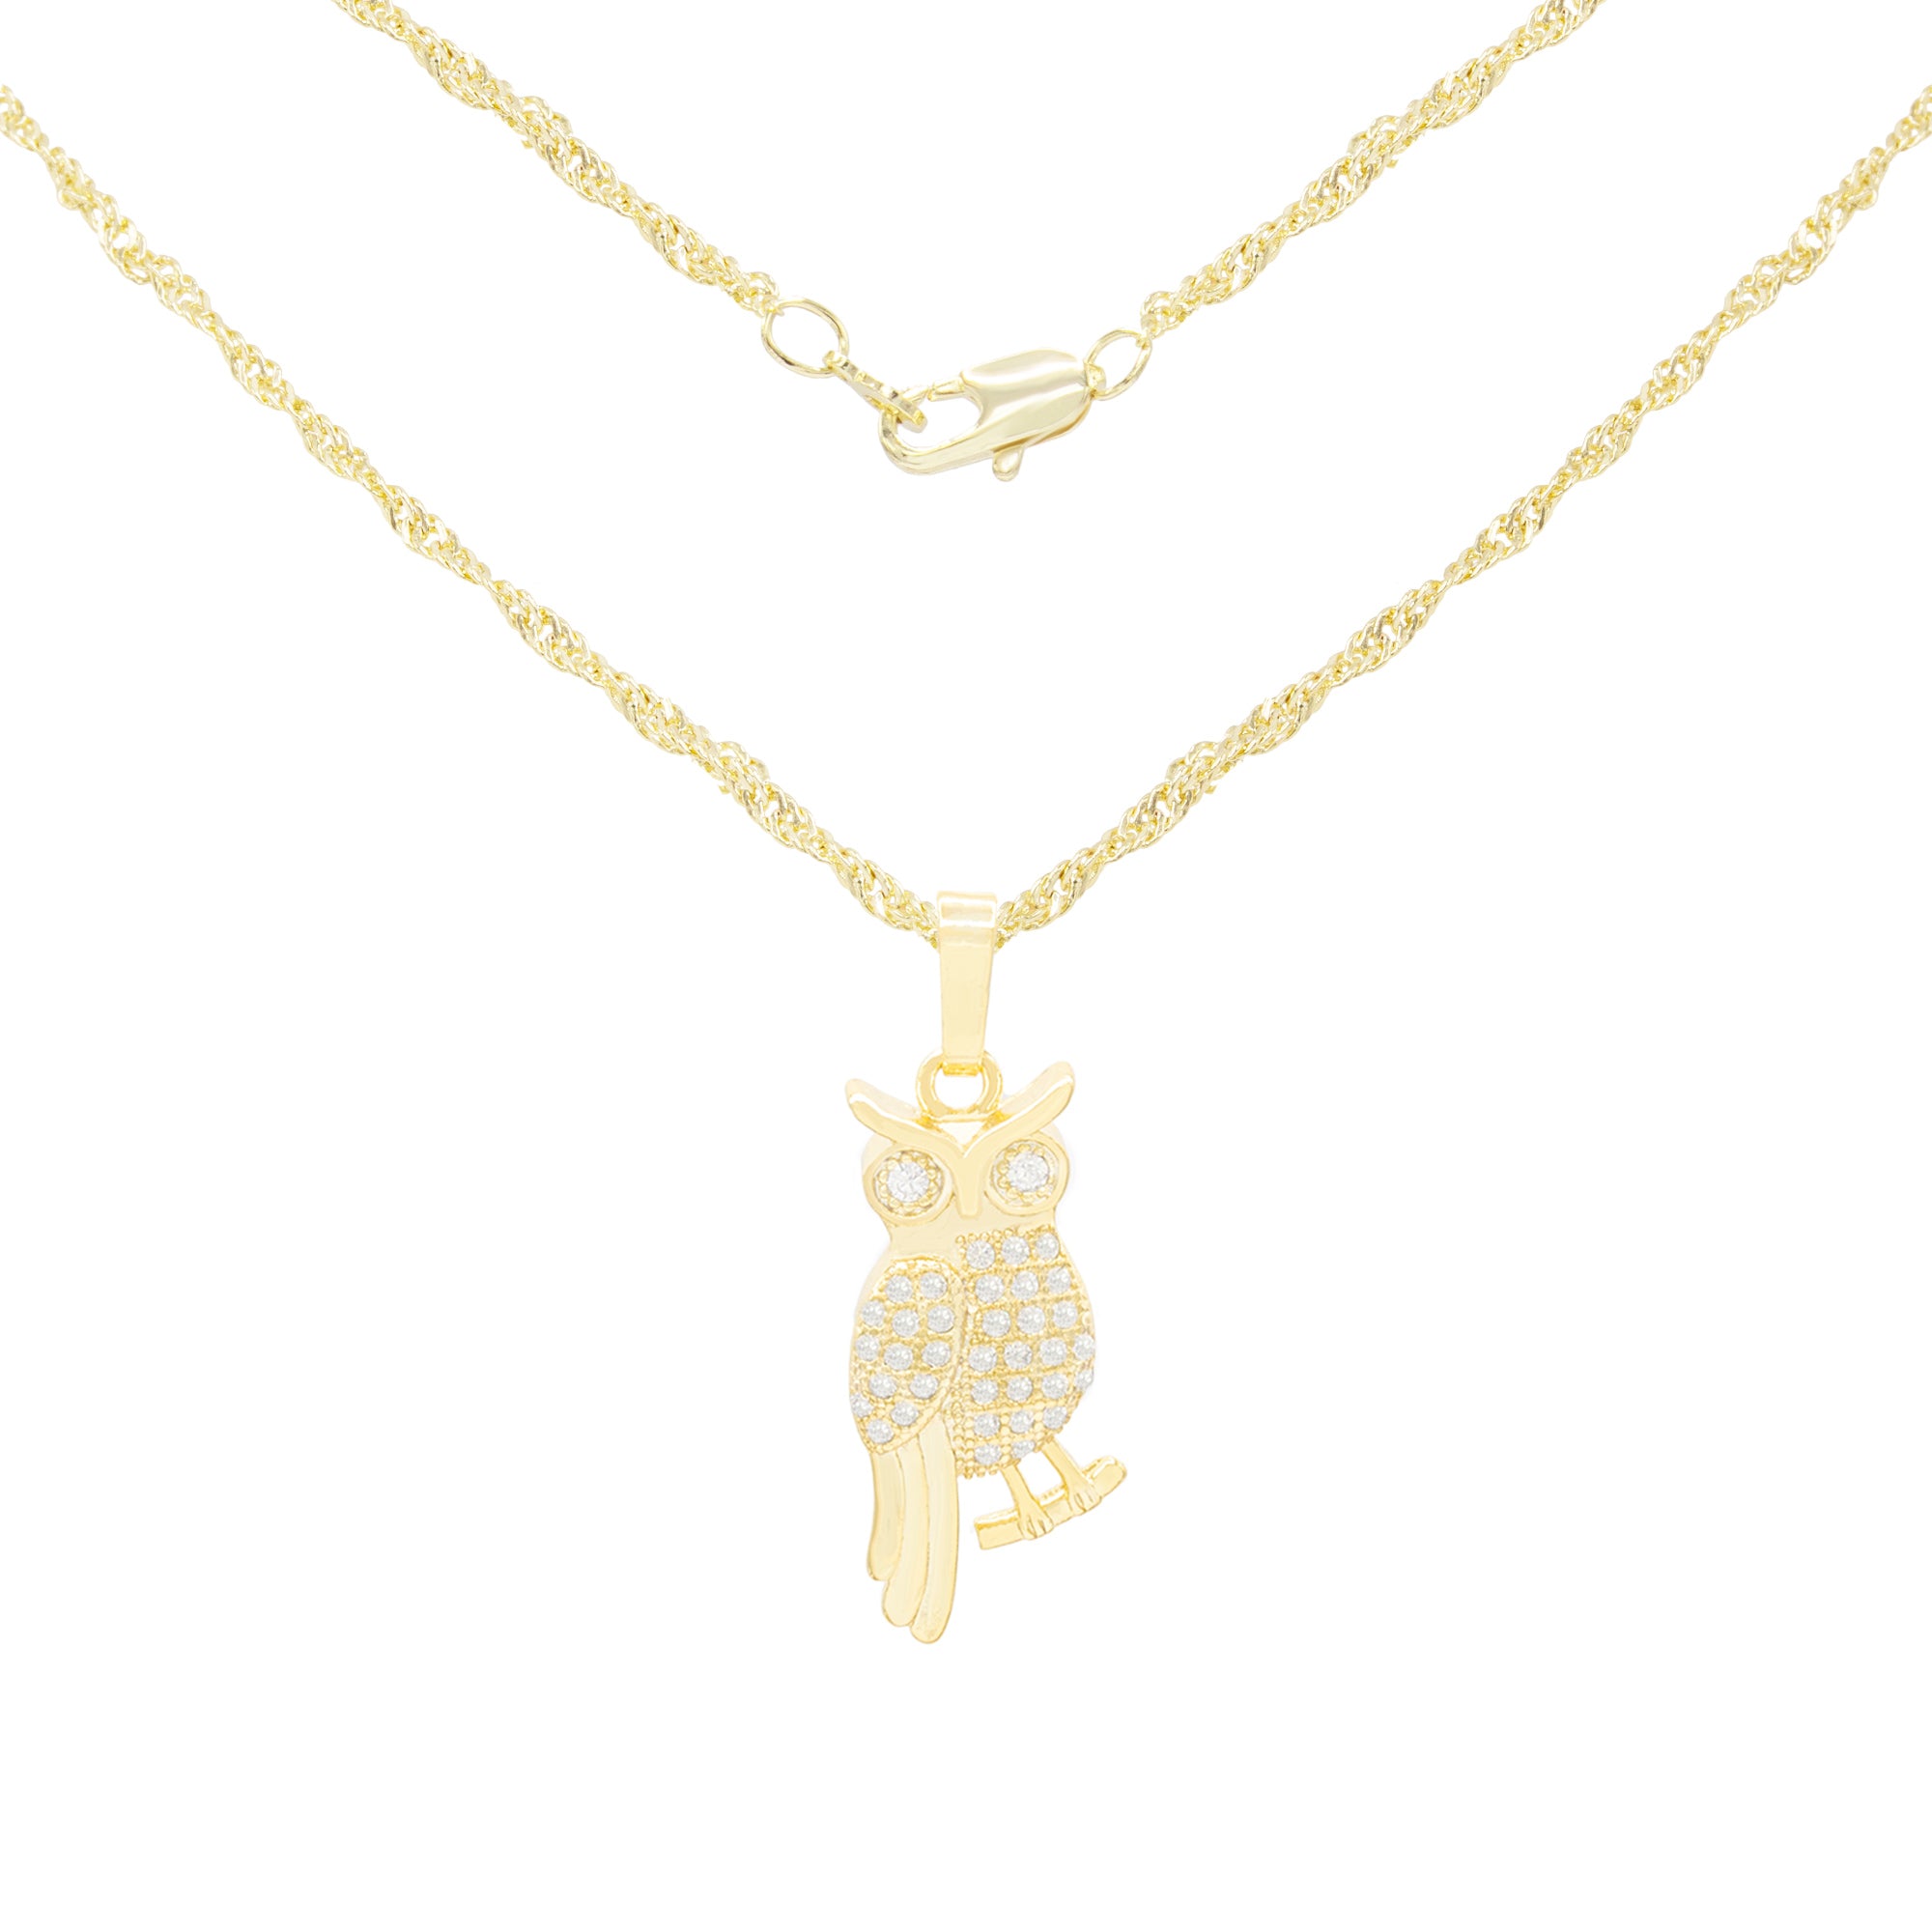 Smart Owl Cubic Zirconia Pendant With Necklace Set 14K Gold Filled